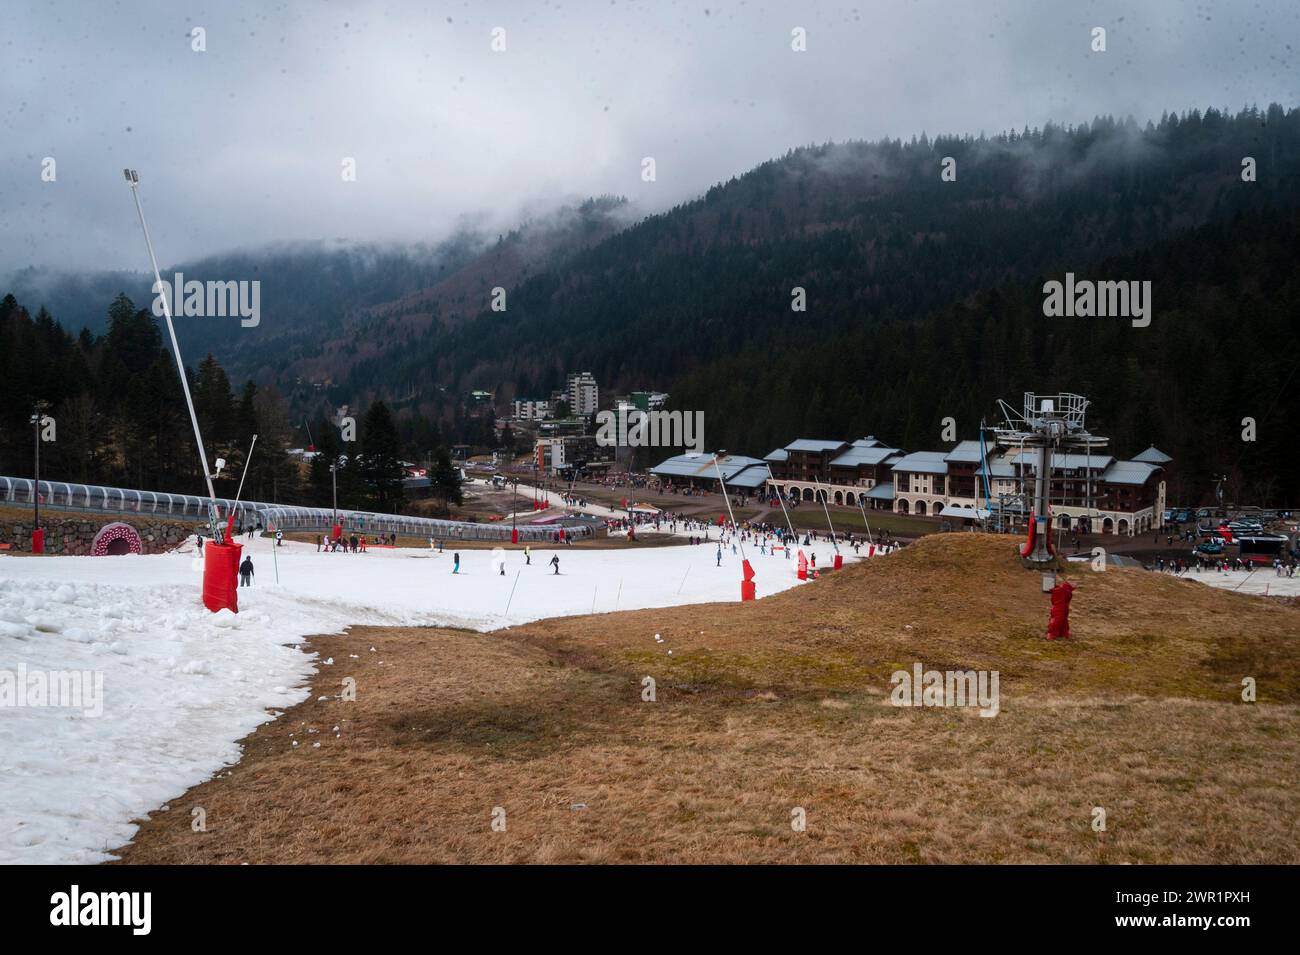 La Bresse, France. 04th Mar, 2024. Nicolas Landemard/Le Pictorium - Illustrations of a ski resort in Bresse. - 04/03/2024 - France/Lorraine (french region)/La Bresse - Those involved in tourism in the Bresse Hohnek region can all testify to a disastrous 2024 winter season overall, with visitor numbers down by between 30% and 40%. The resort itself is suffering from a real lack of snow and has had to close a large part of its ski area. The lack of snow is one of the main explanations, but so is the rising cost of living in France. Credit: LE PICTORIUM/Alamy Live News Stock Photo